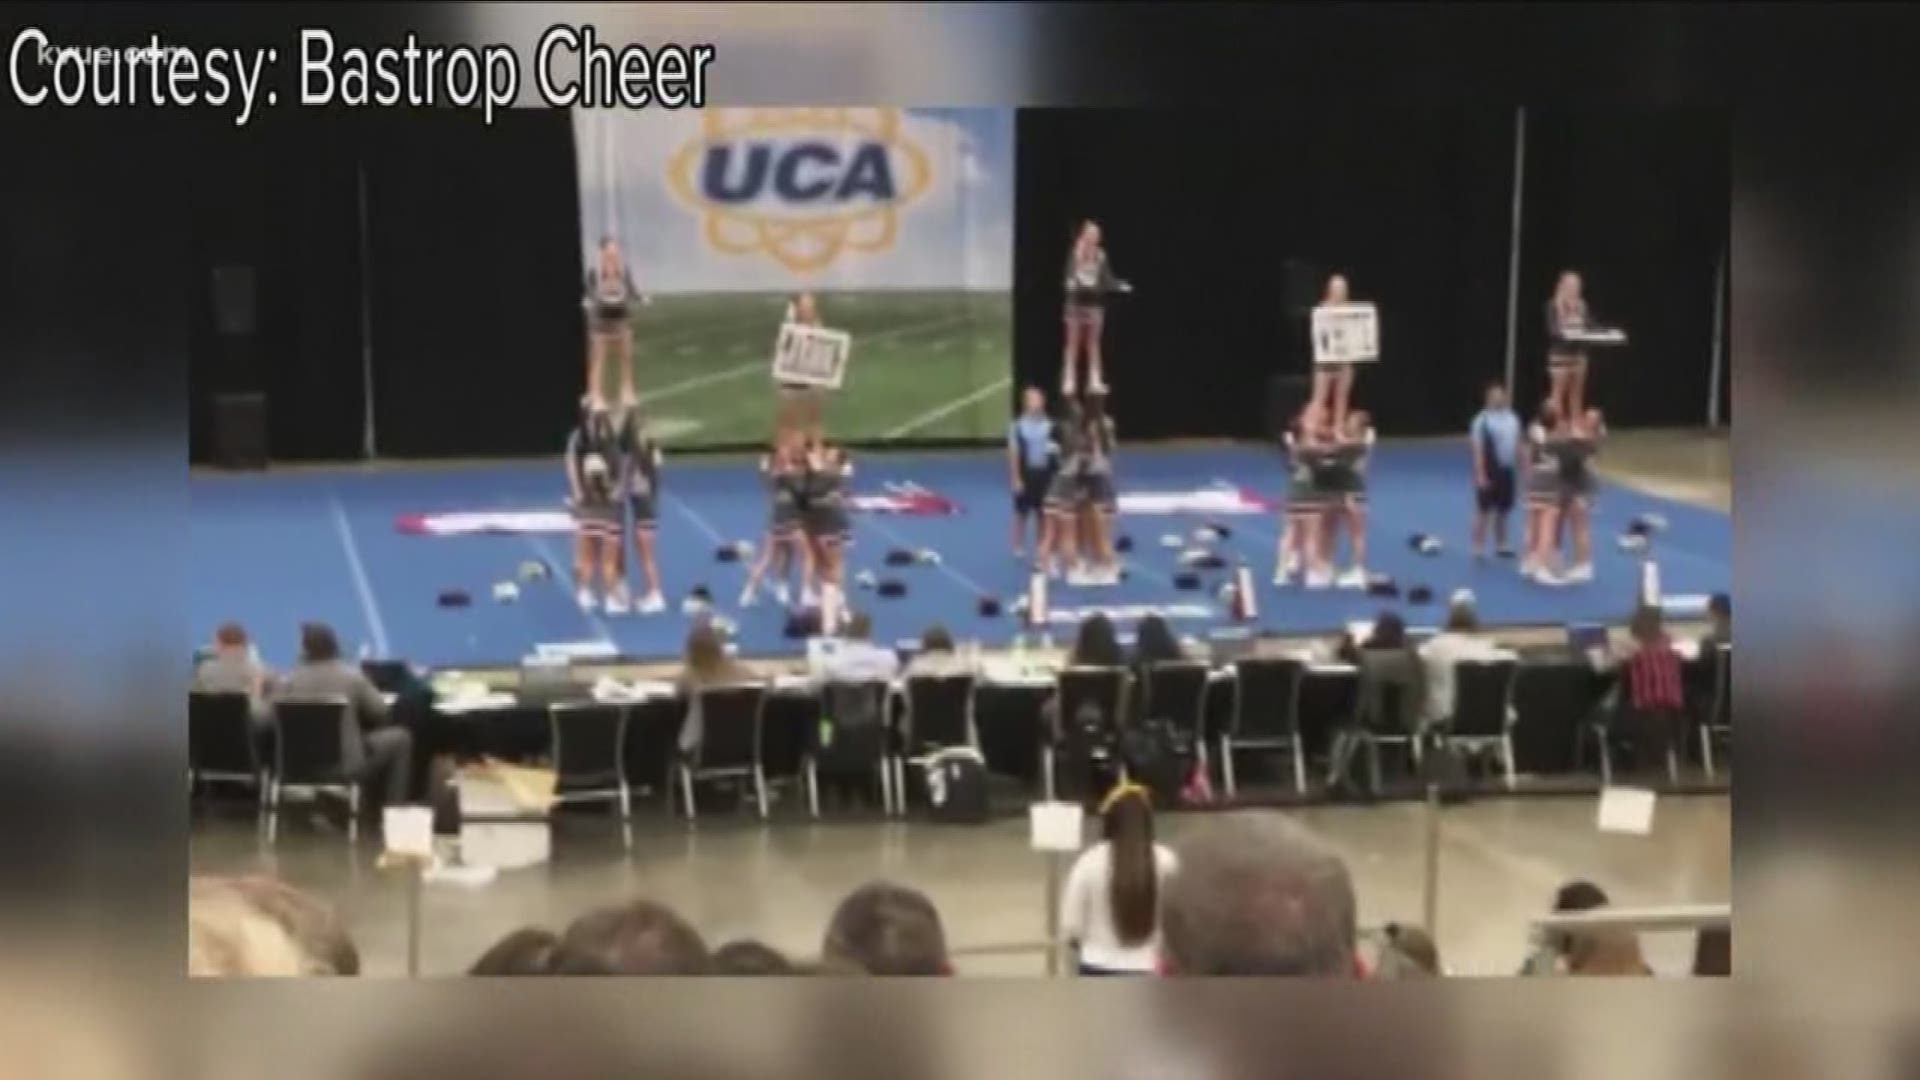 For the first time in program history, the Bastrop High School cheerleading squad earned an invite to the UCA National High School Cheerleading Championship.